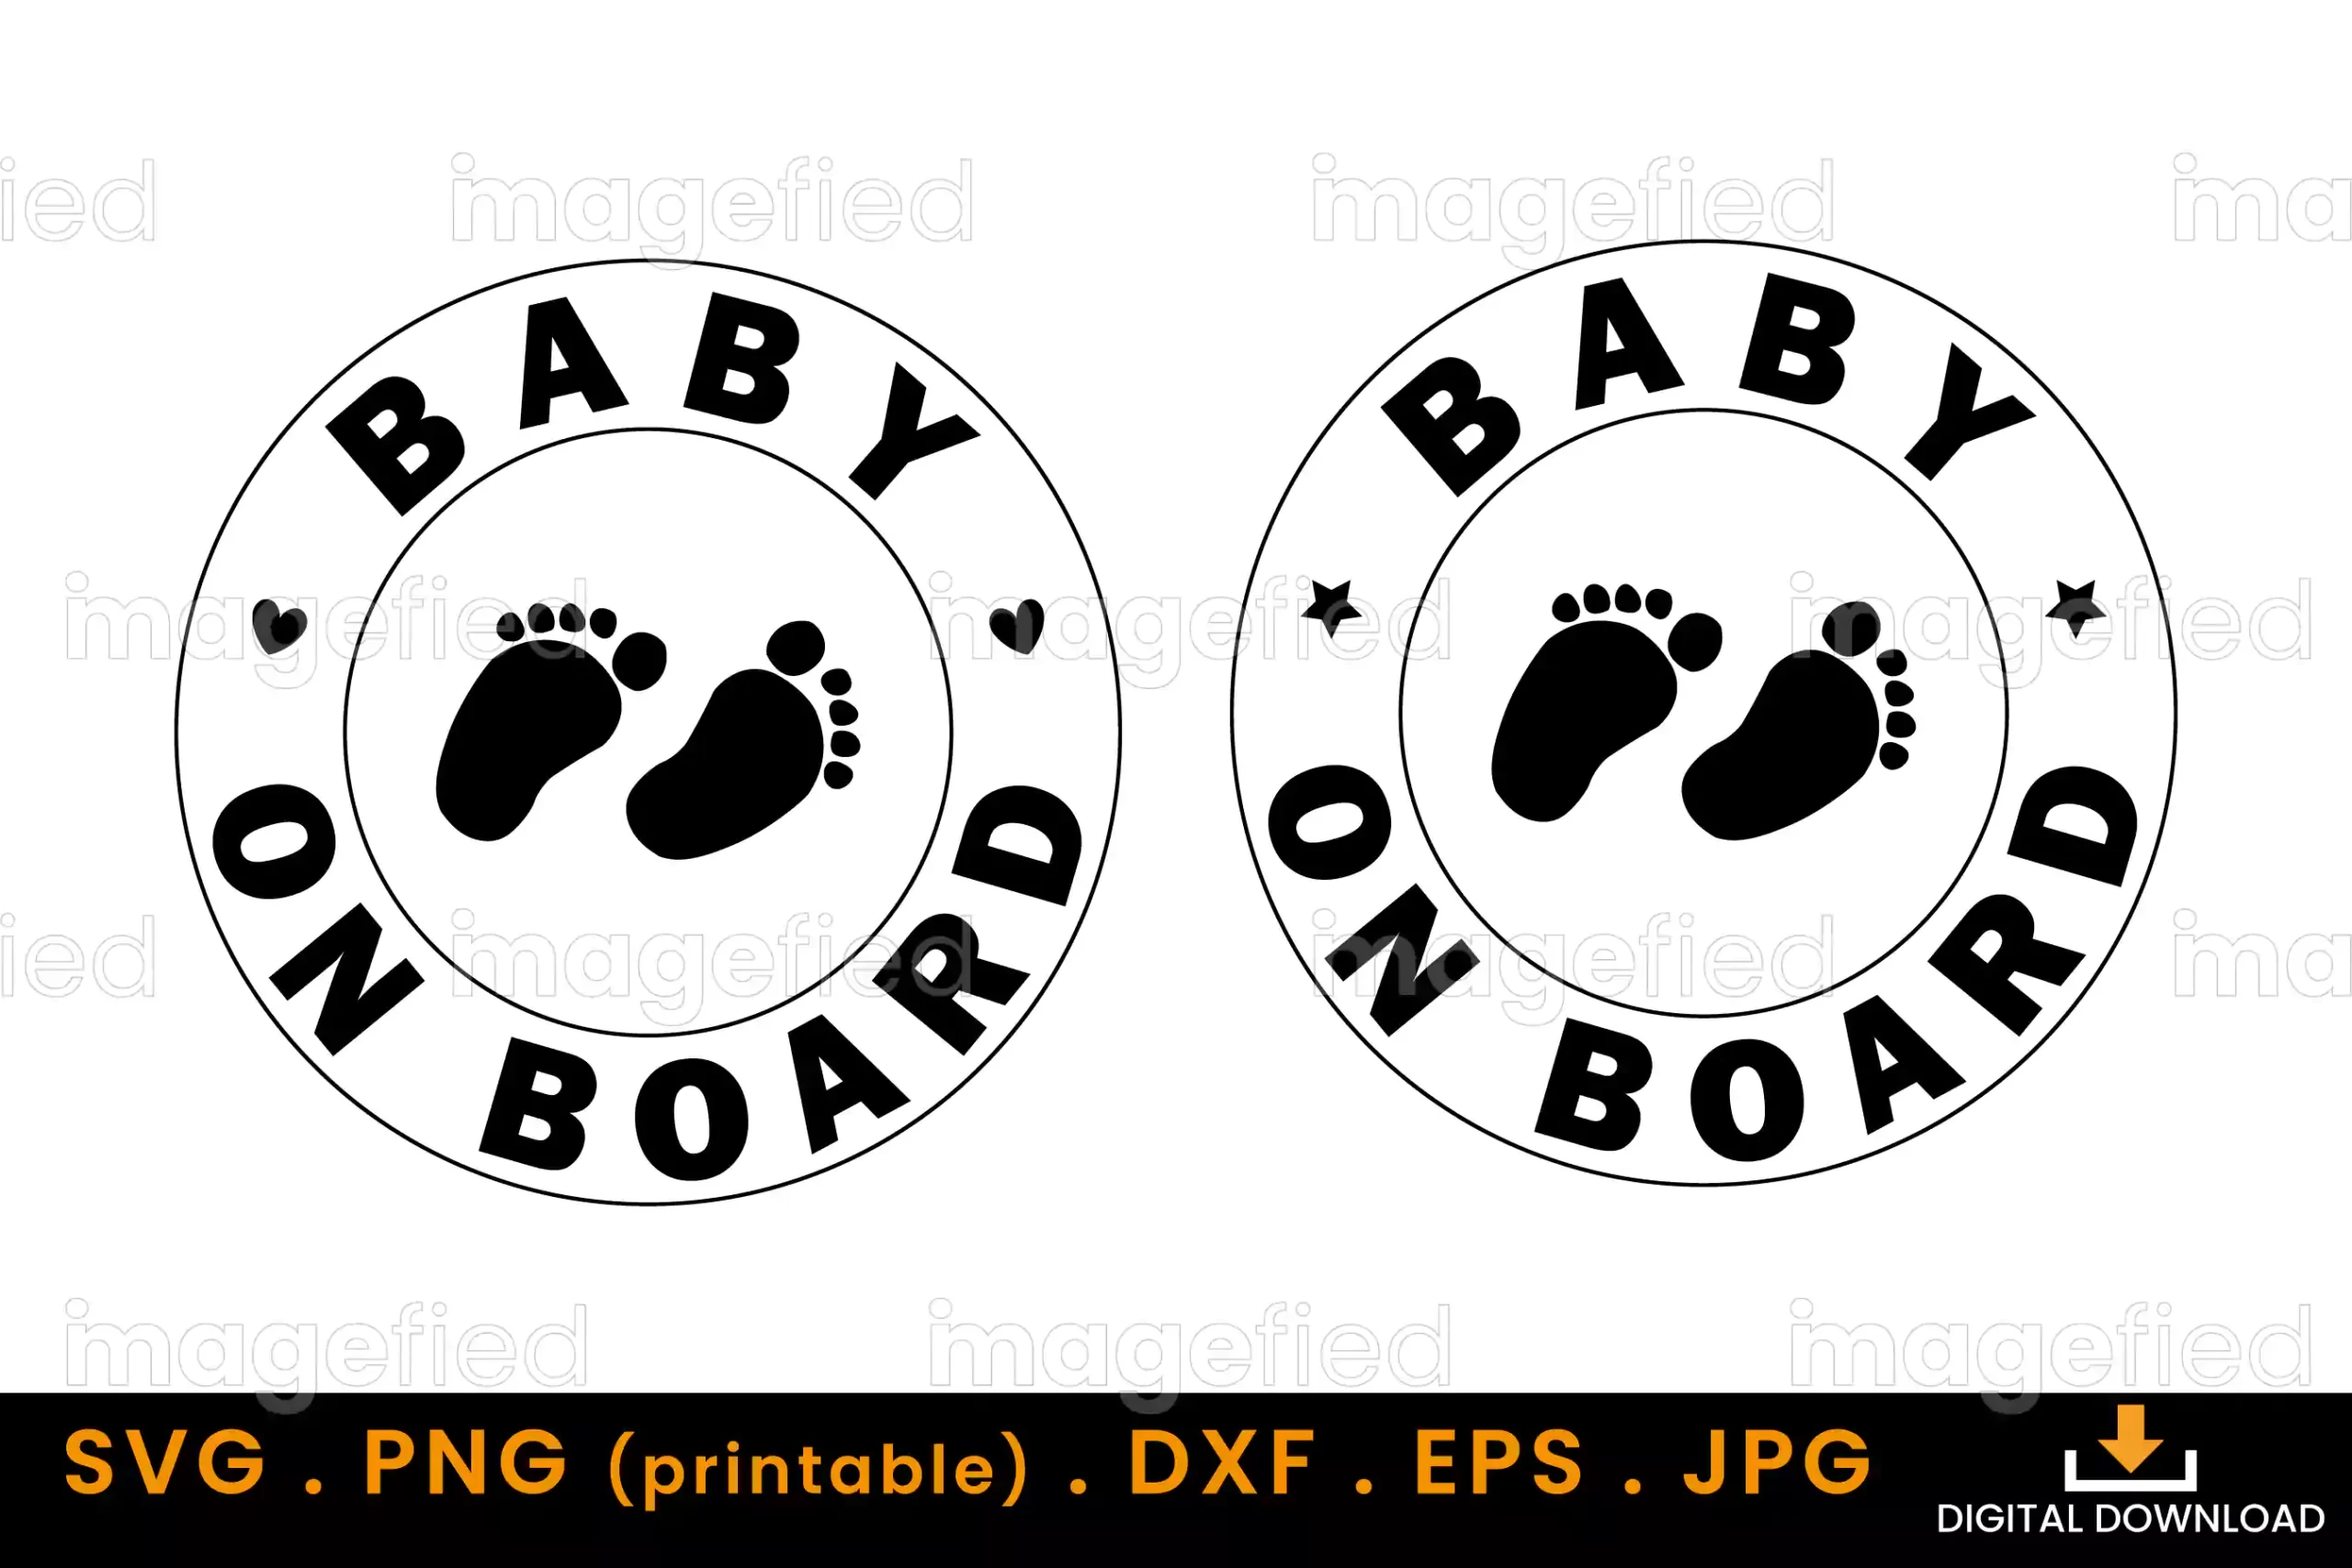 Baby on Board Svg, Car Stickers Labels, Vinyl Decals, Banners,  Round Design with Heart and Feet, Vehicle Newborn Baby Sign